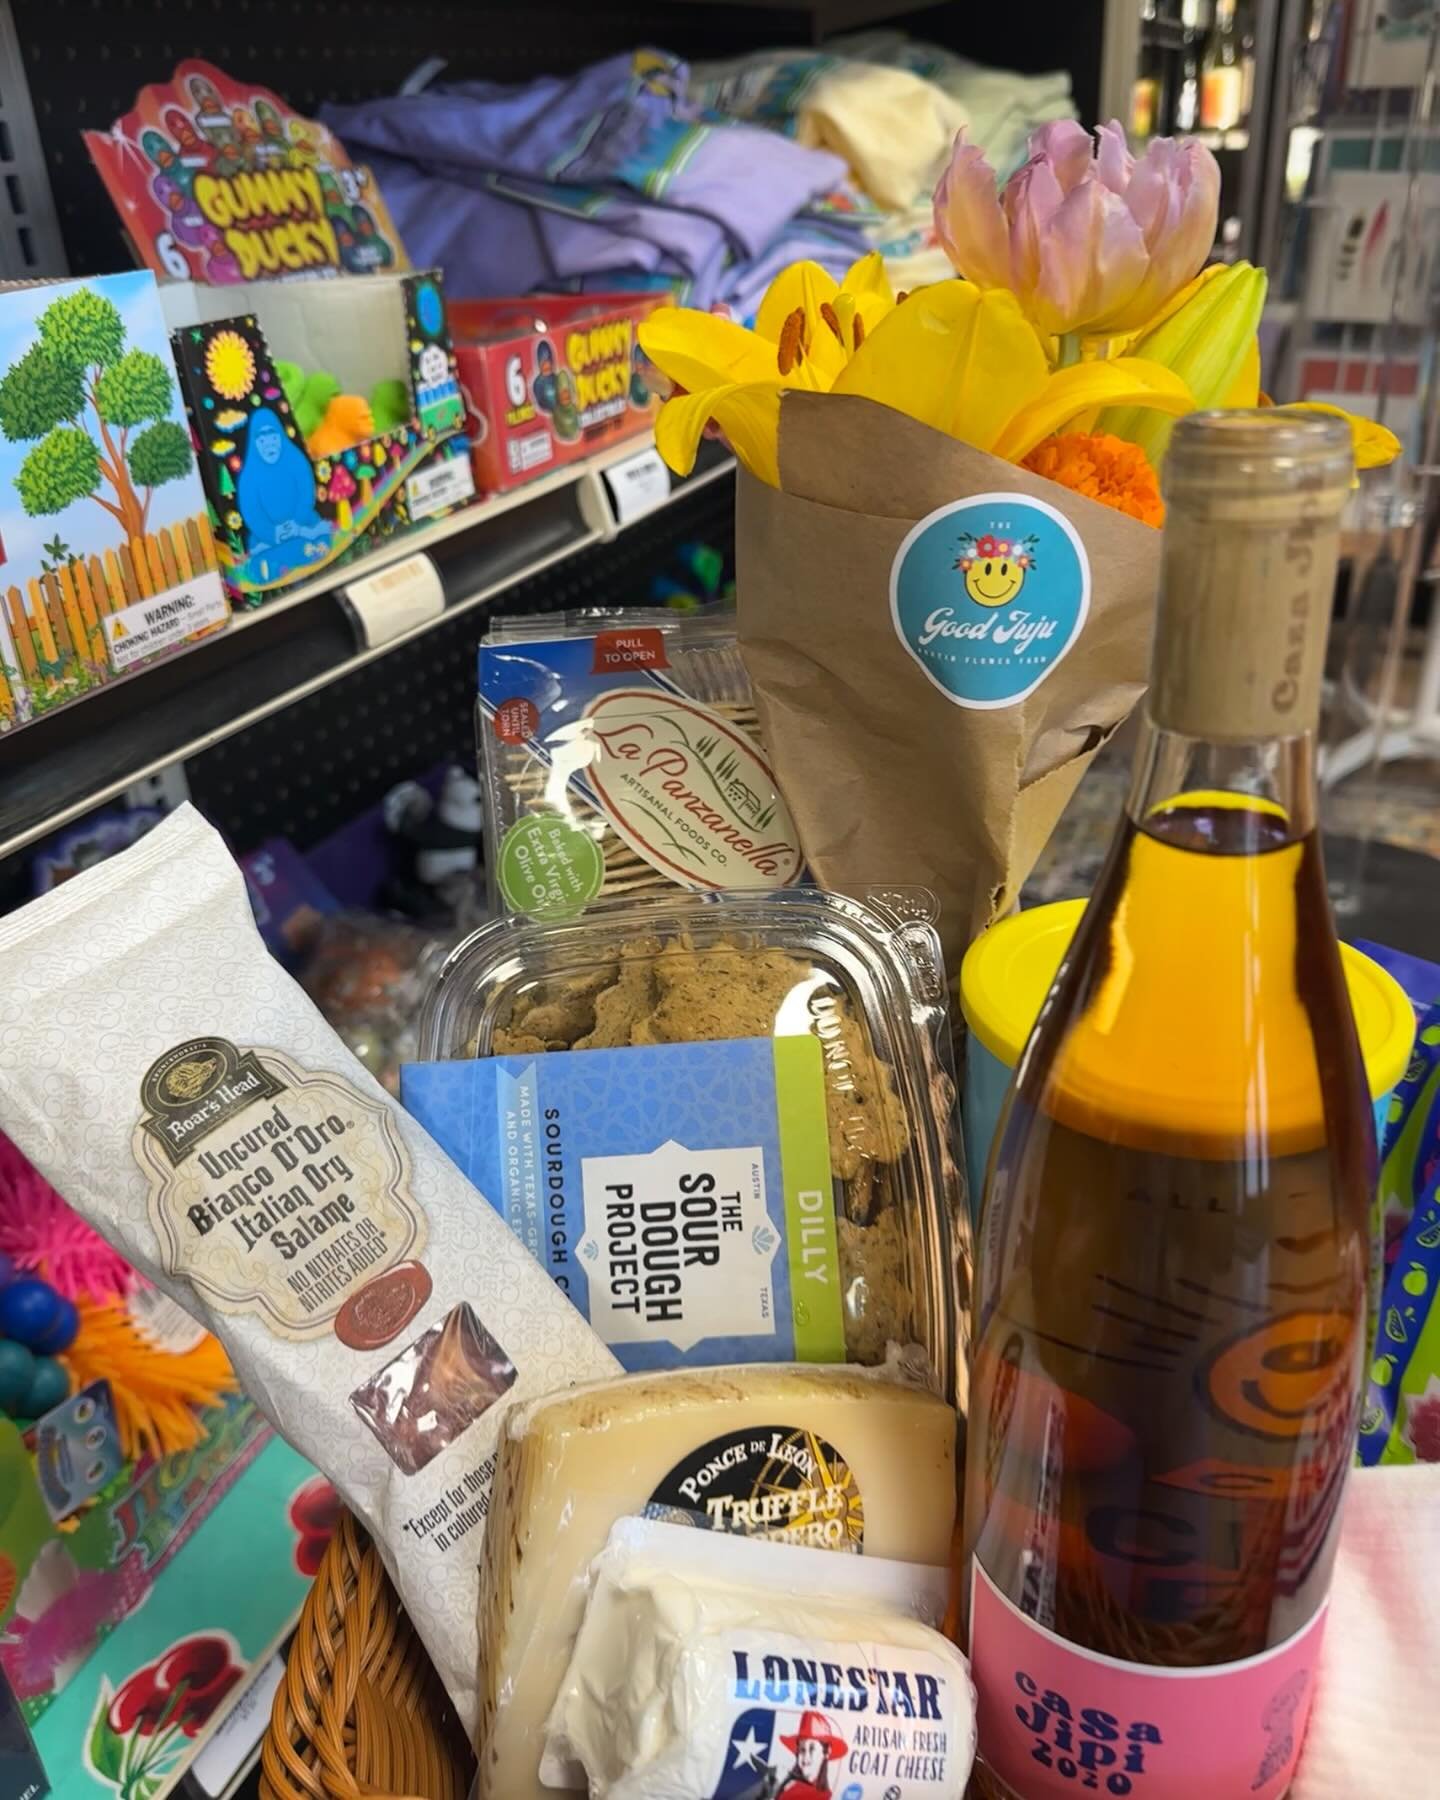 Cheese, wine, chocolates and fresh flowers 💐 Let us curate your perfect gift basket! Talk to Callie at our Burnet location to have something special put together for you!